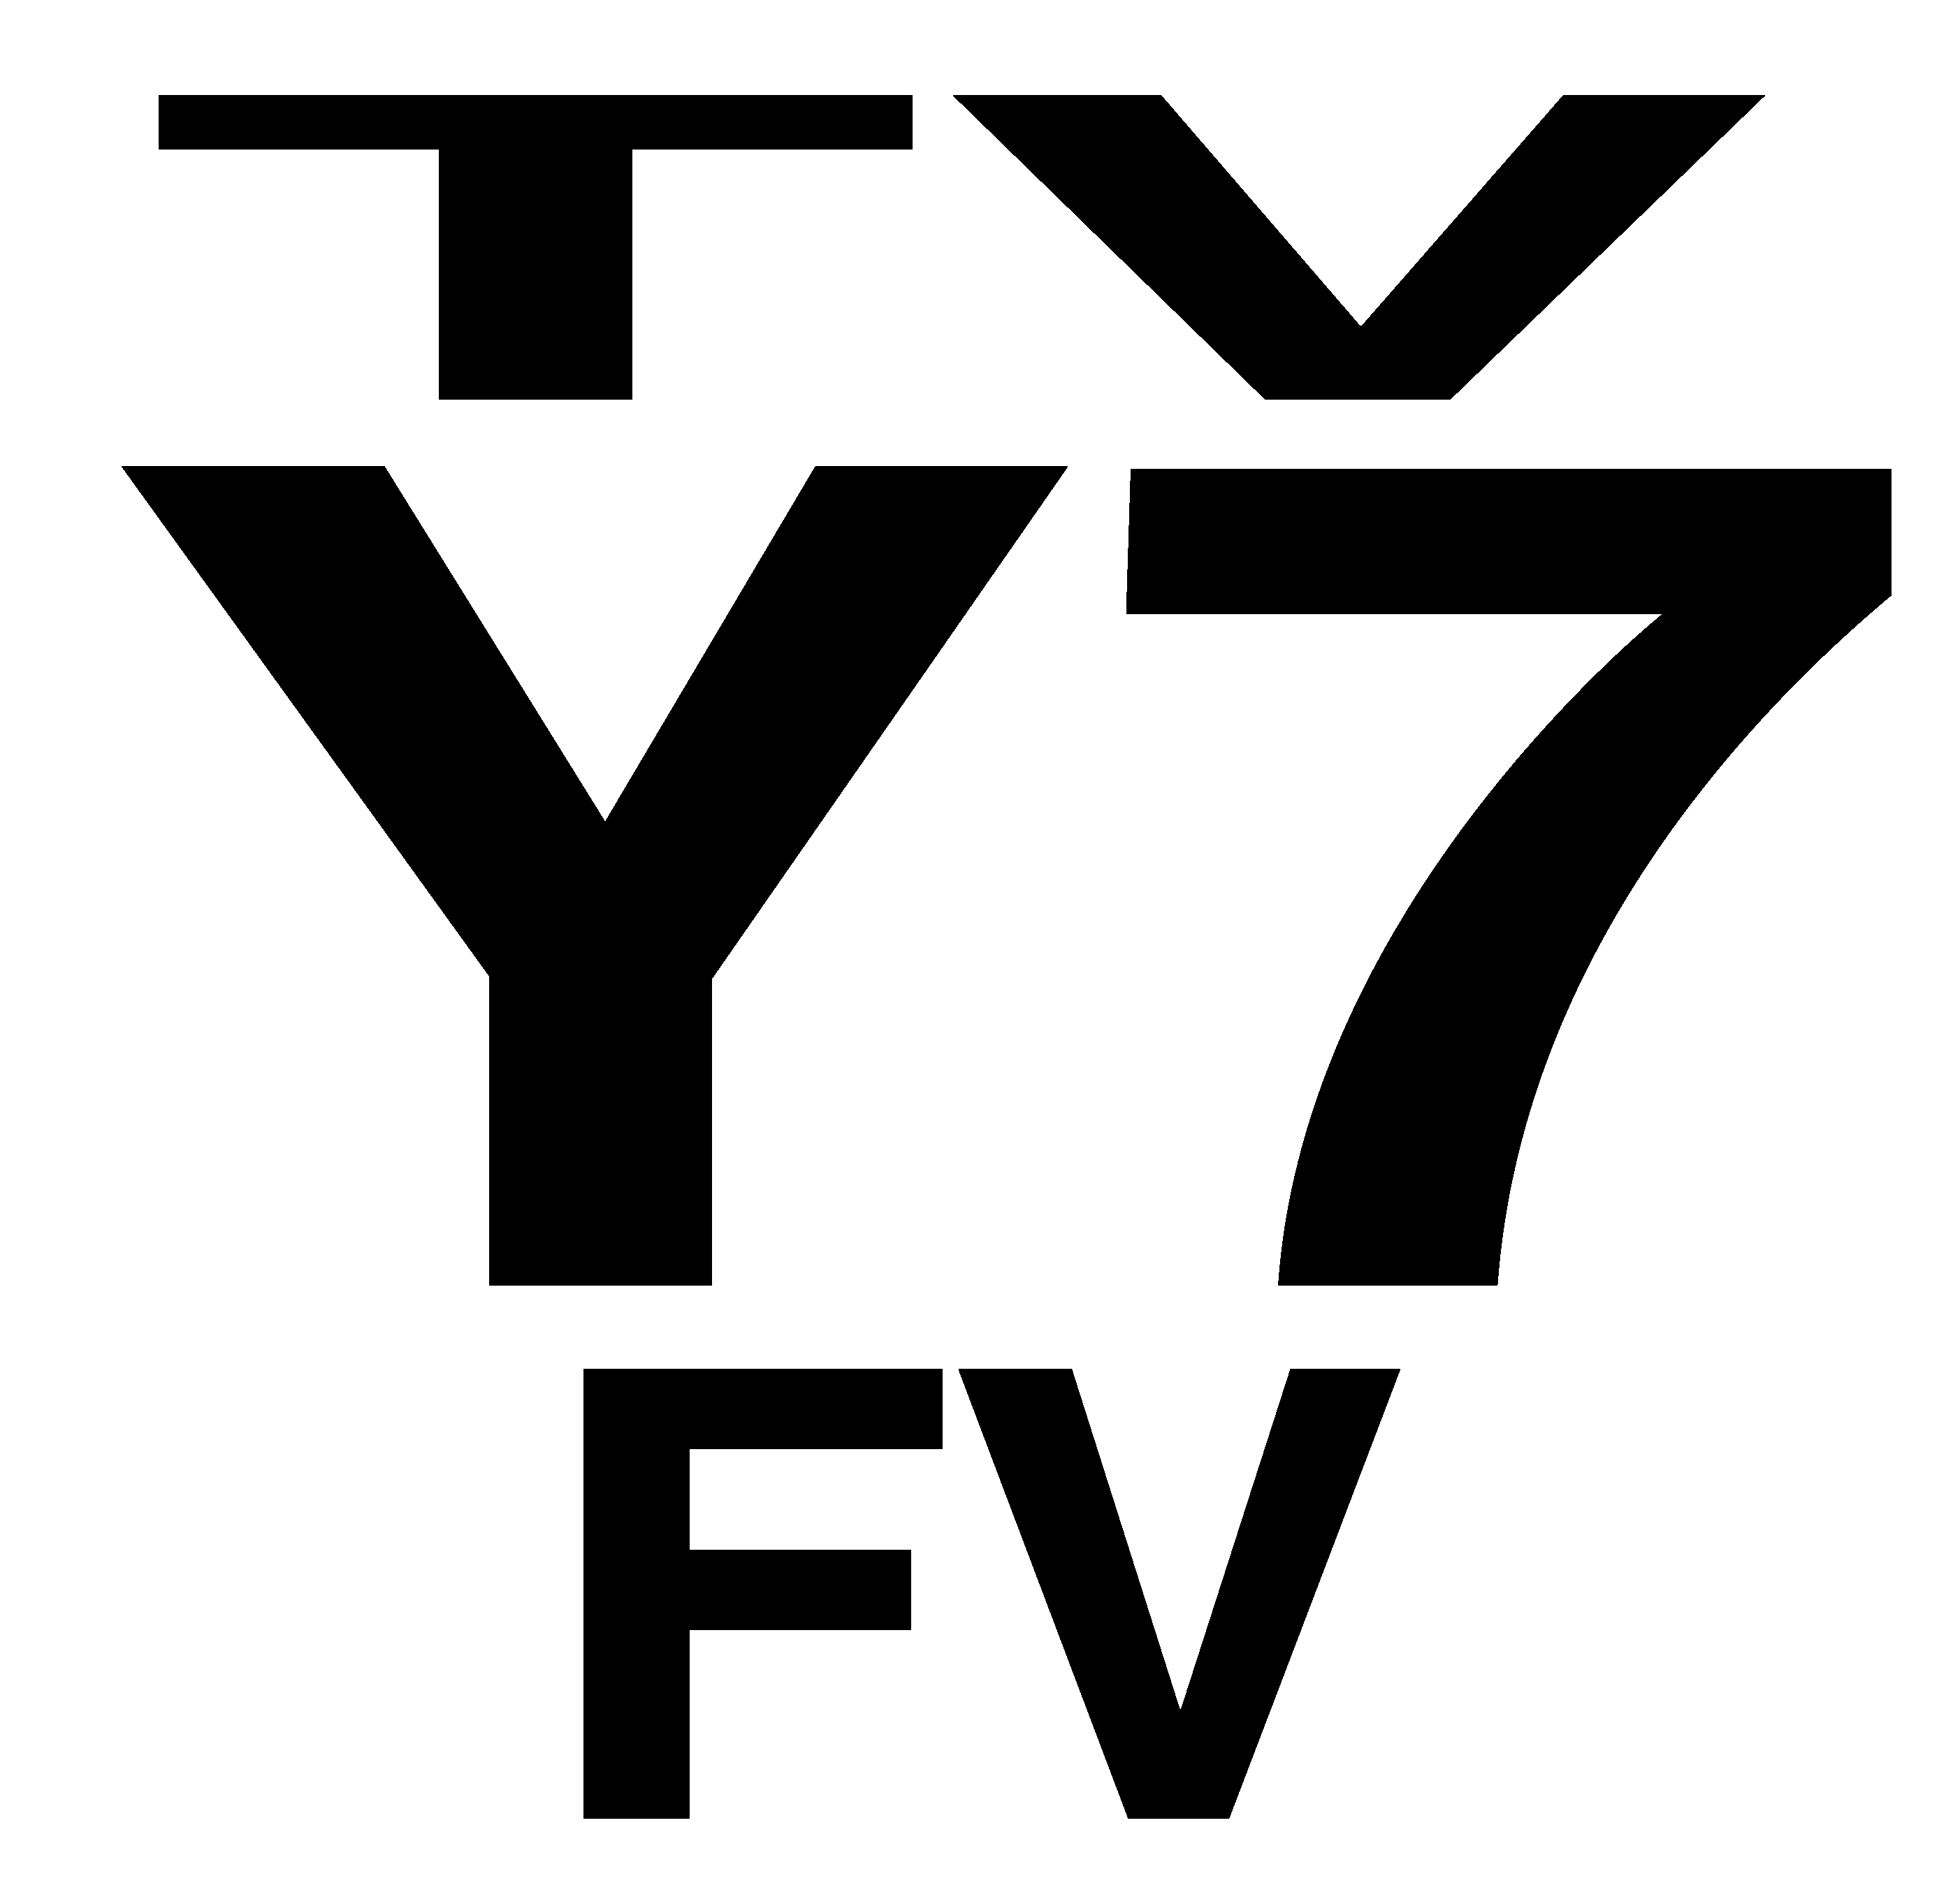 TV-Y7 CC Logo - File:White TV-Y7-FV icon.png - Wikimedia Commons